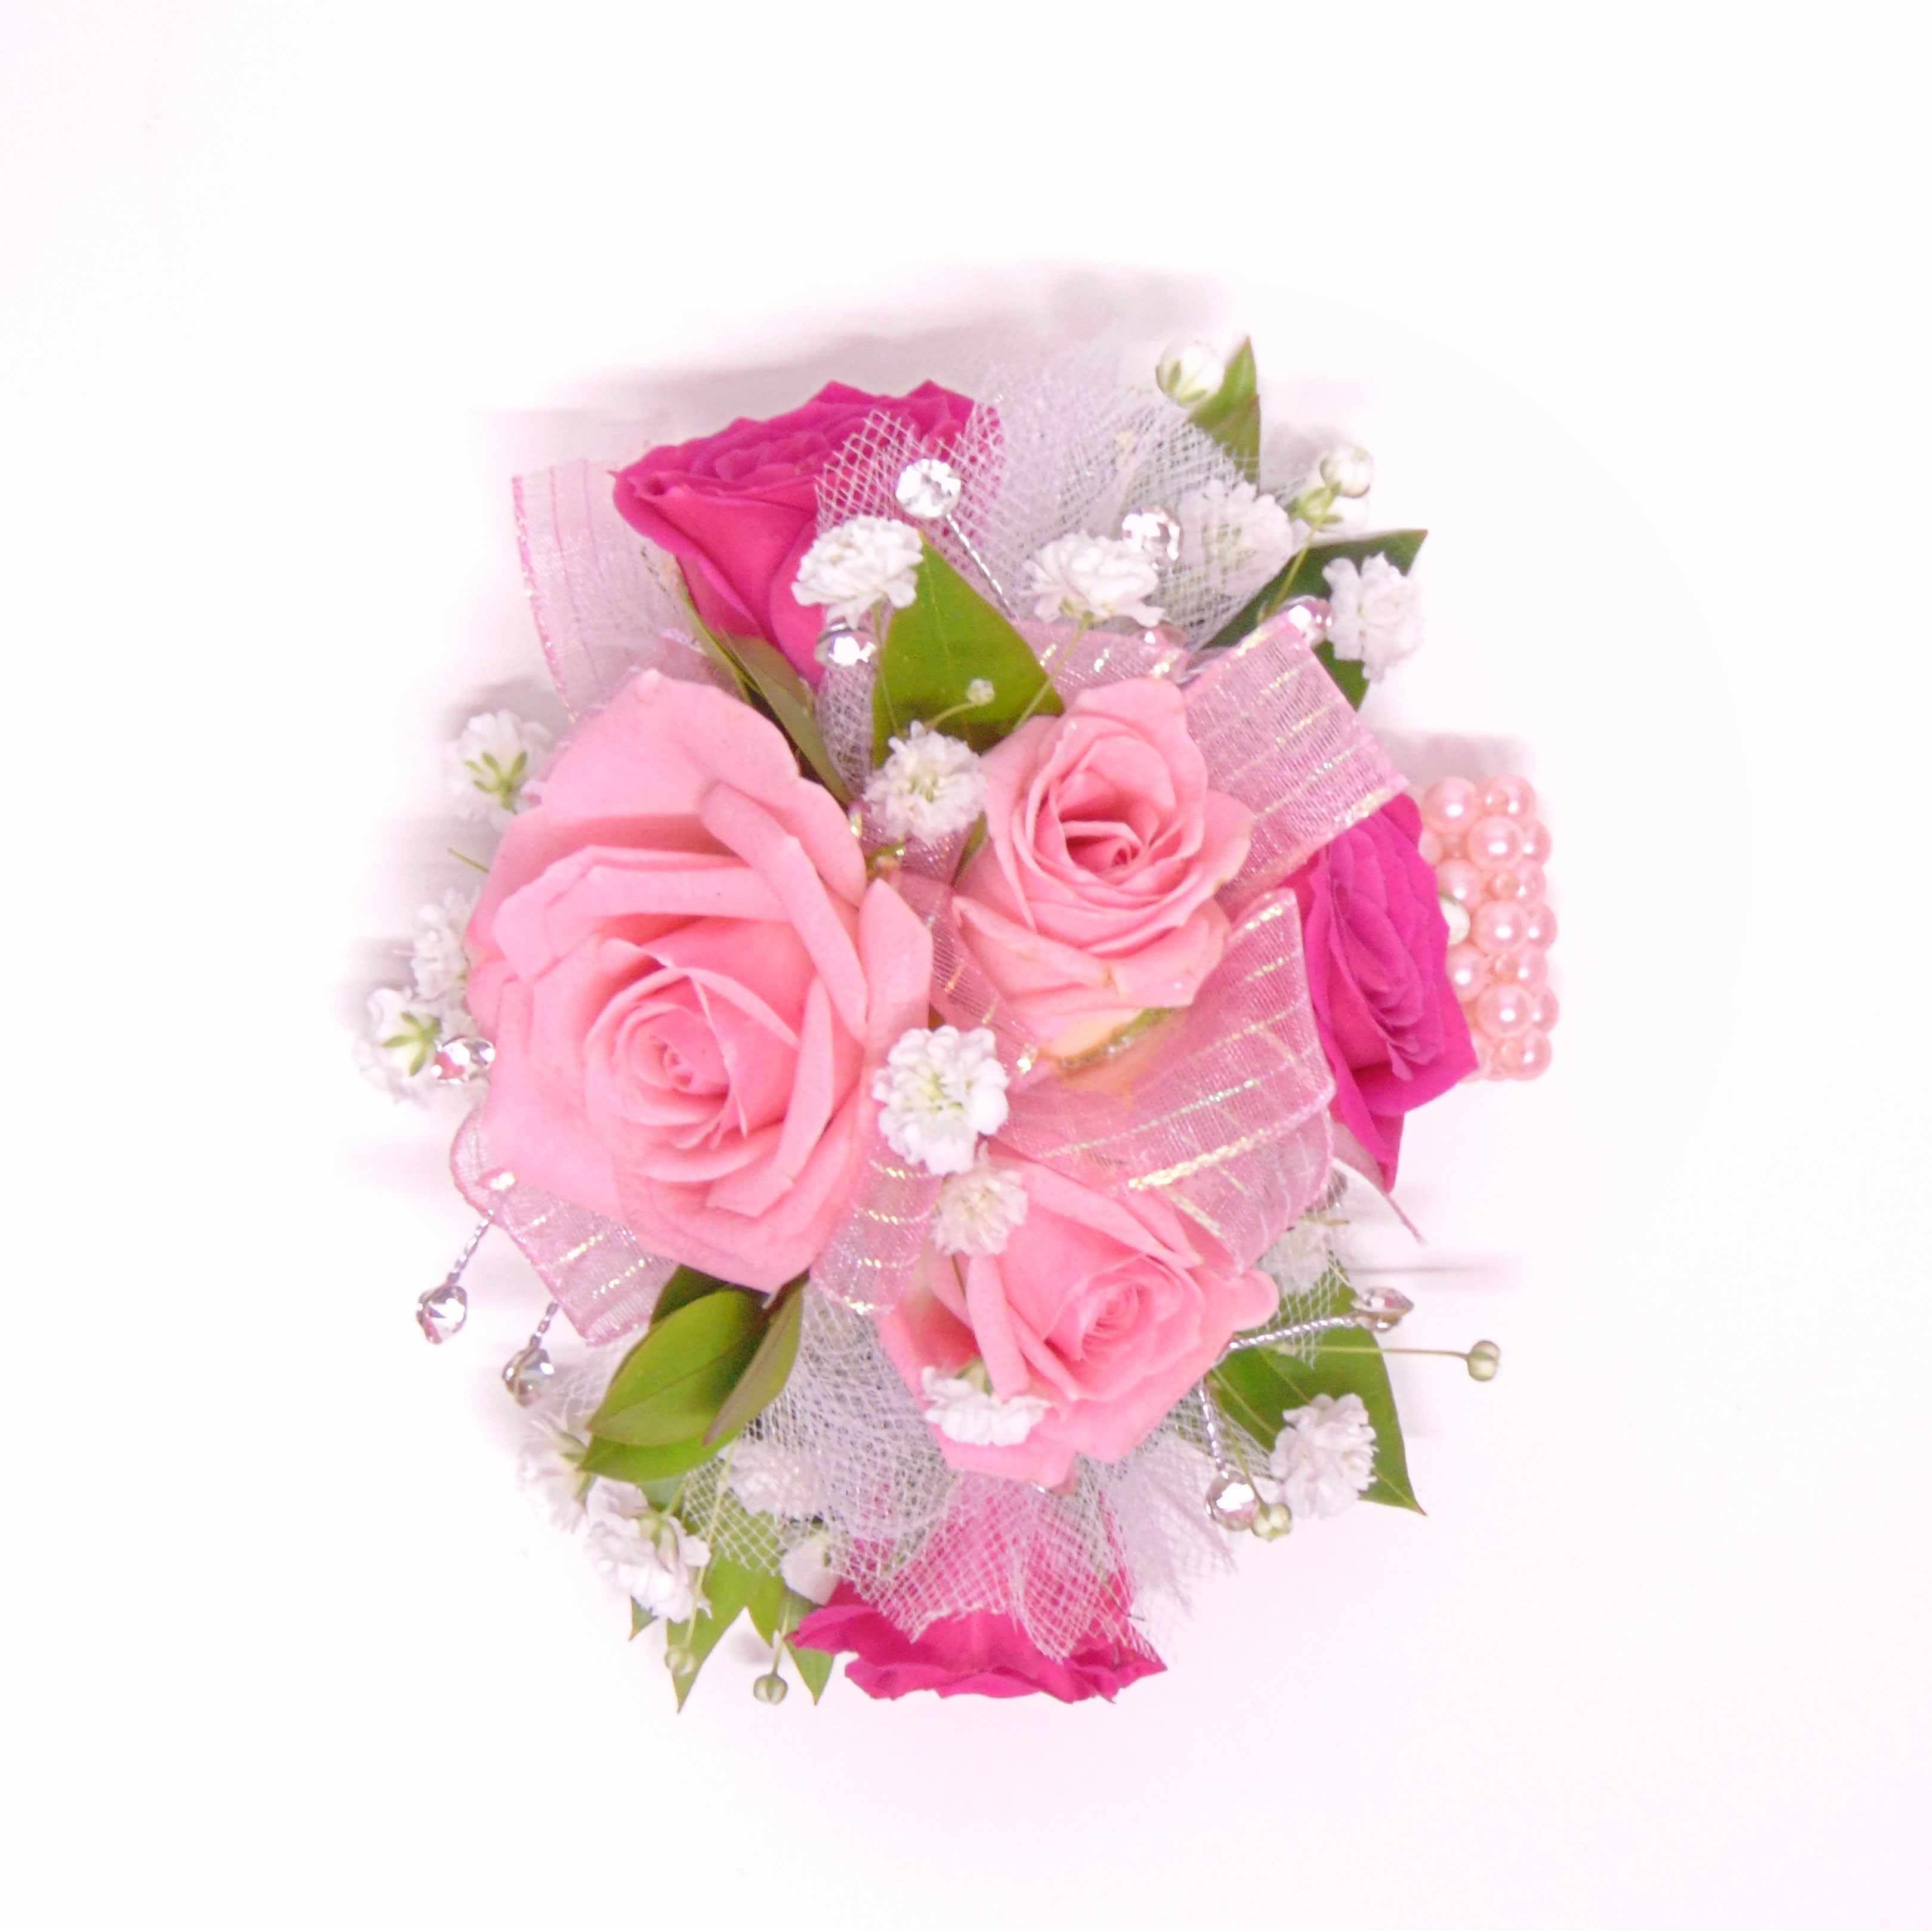 Pink &amp; Hot Pink Wrist Corsage-Bling - Three pink  spray roses &amp; three hot pink spray roses, baby's breath, pink &amp; iridescent ribbon, rhinestone bling, light pink tulle and myrtle greens on a pink beaded wristlet. Includes corsage box.